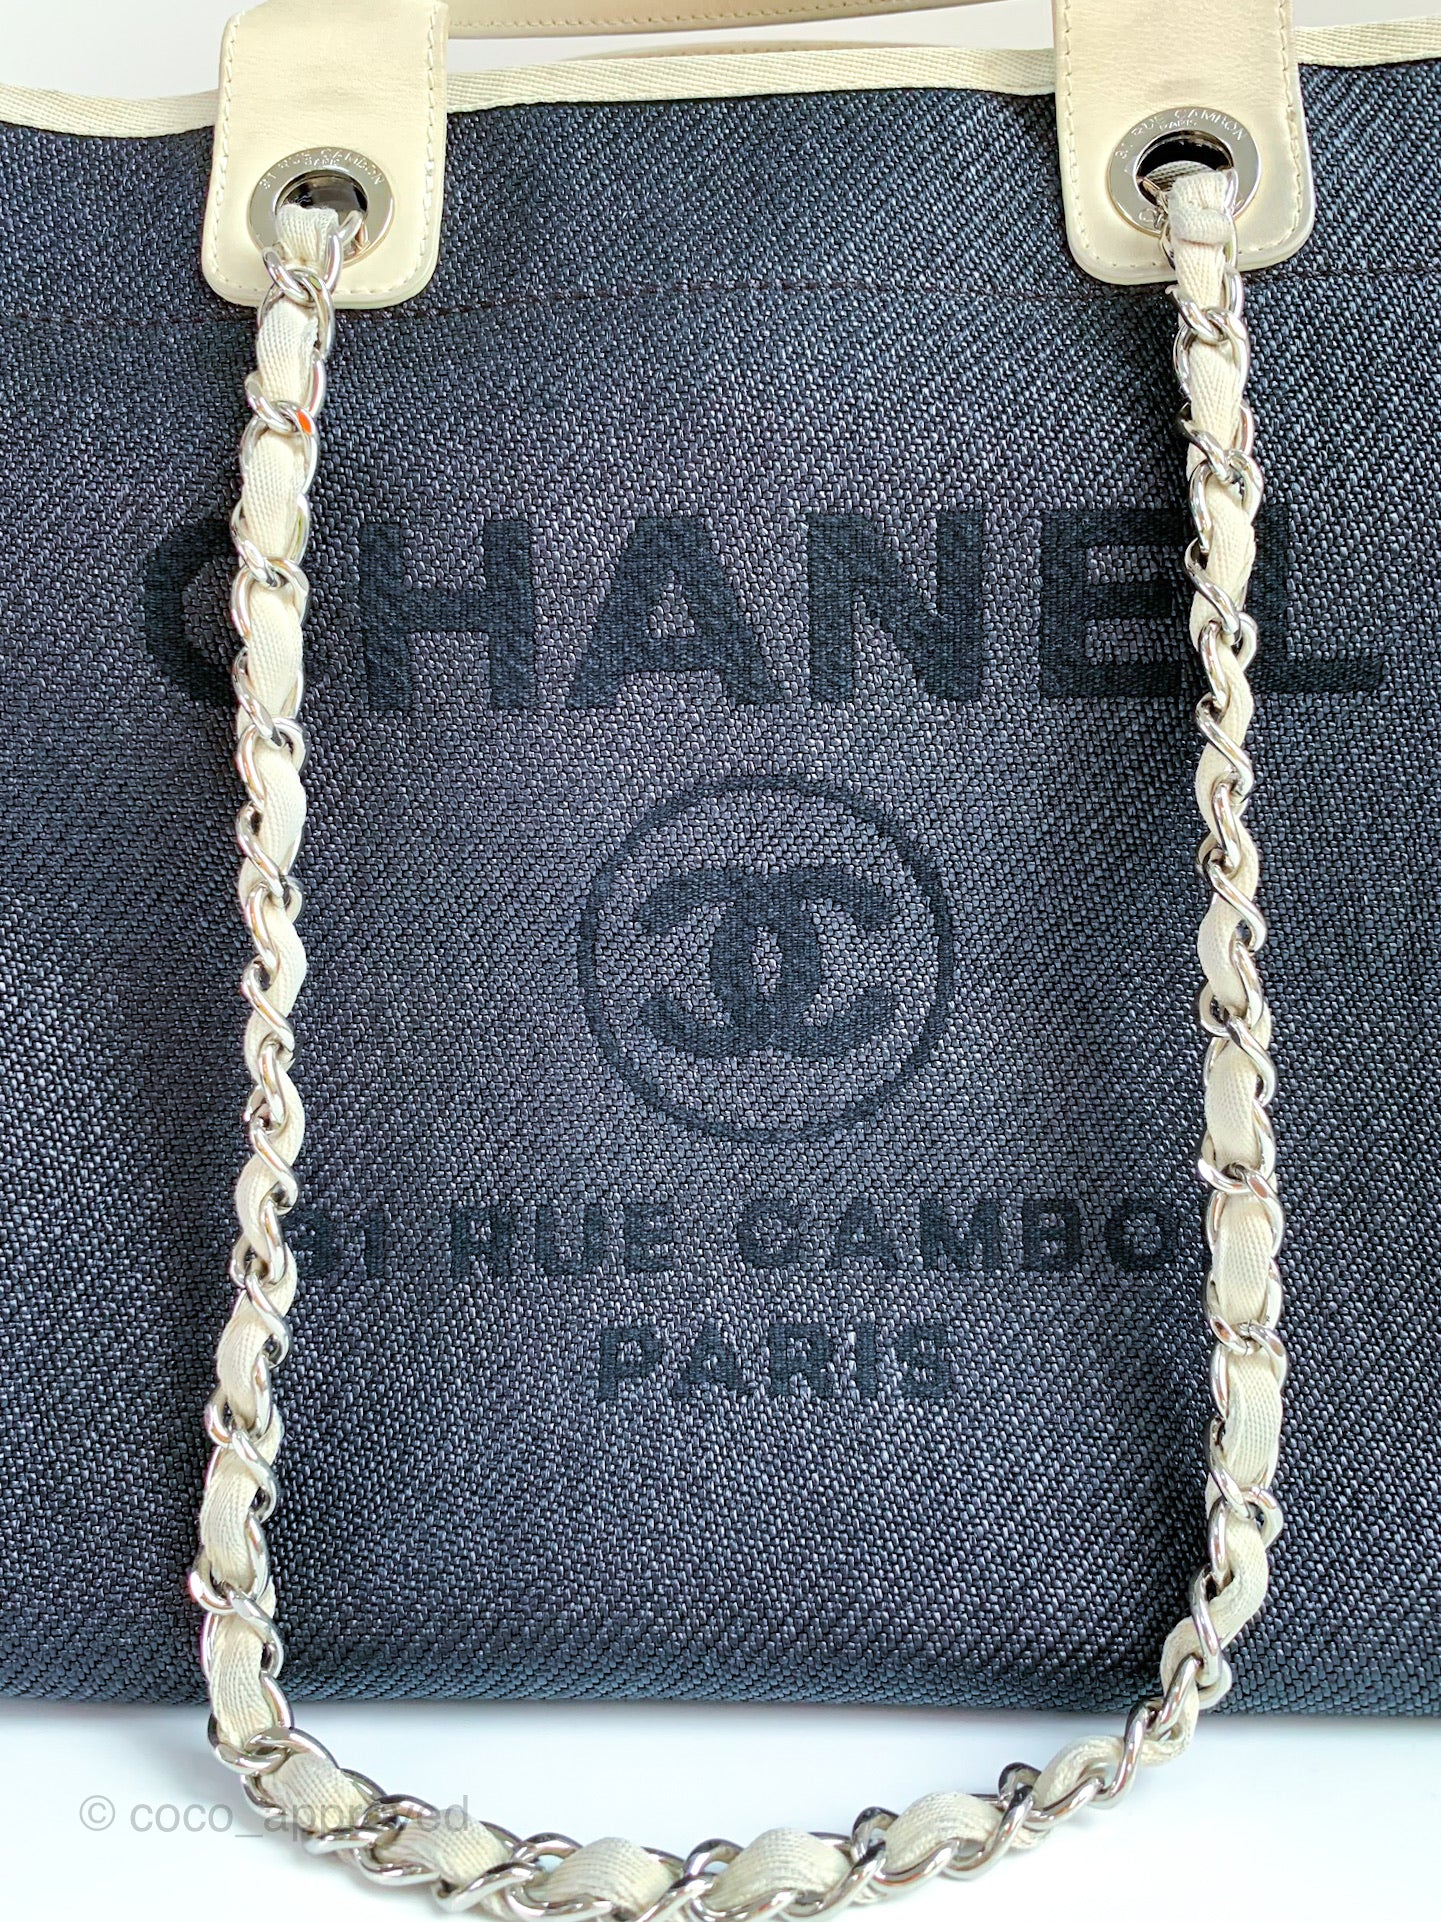 Chanel Canvas Large Deauville Tote Ivory Beige Nude Handles